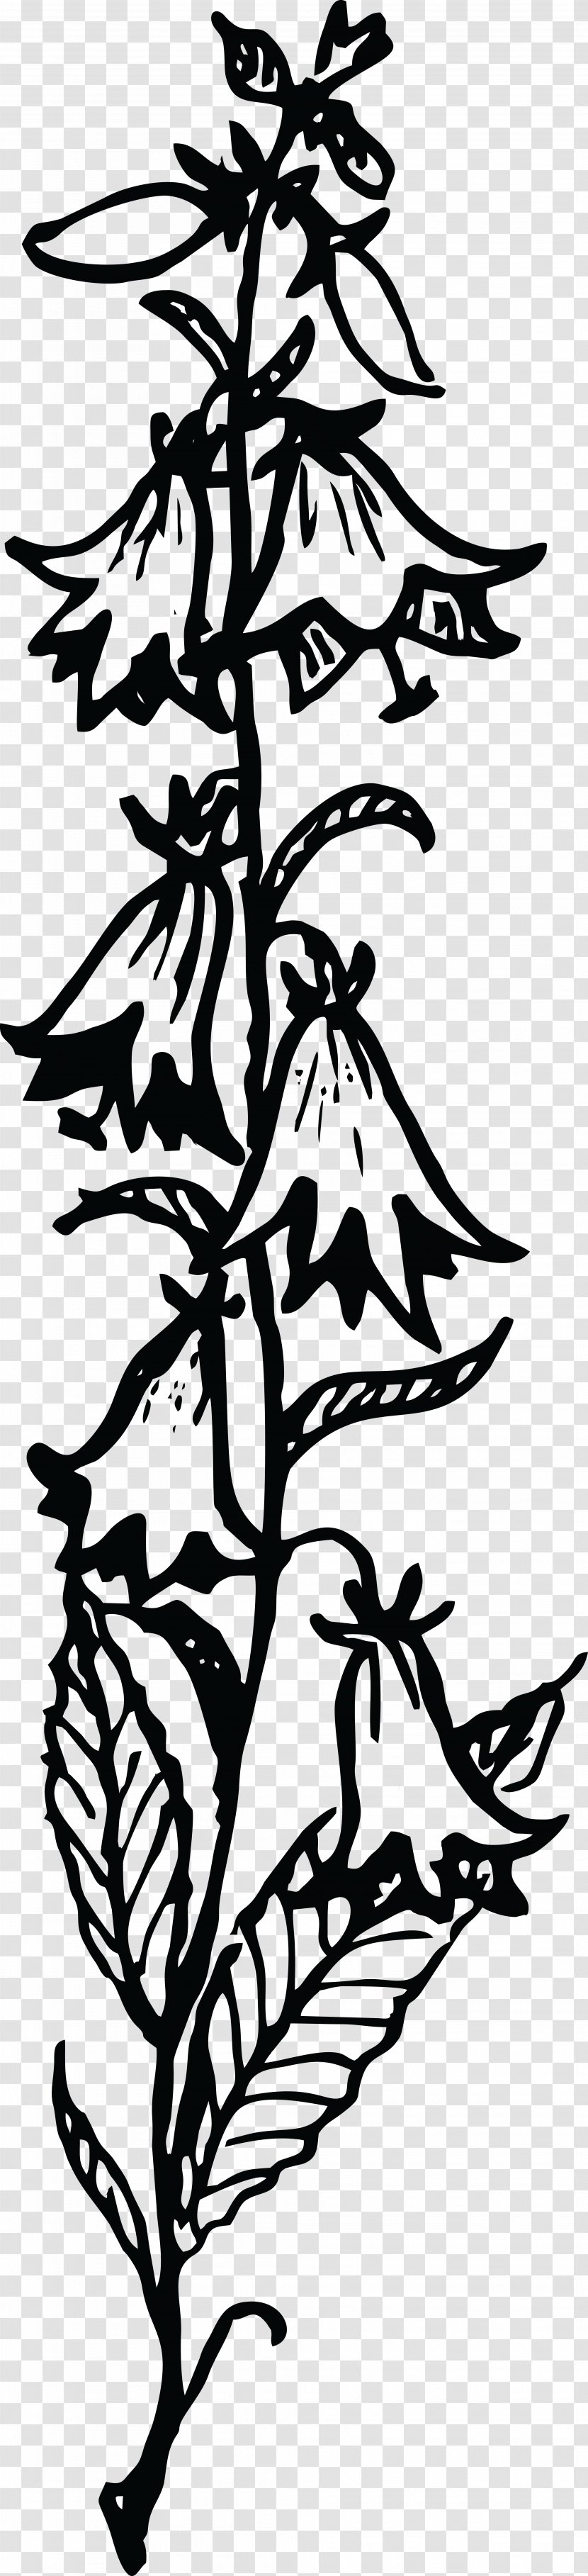 Line Art Drawing Clip - Tree - Cdr Transparent PNG